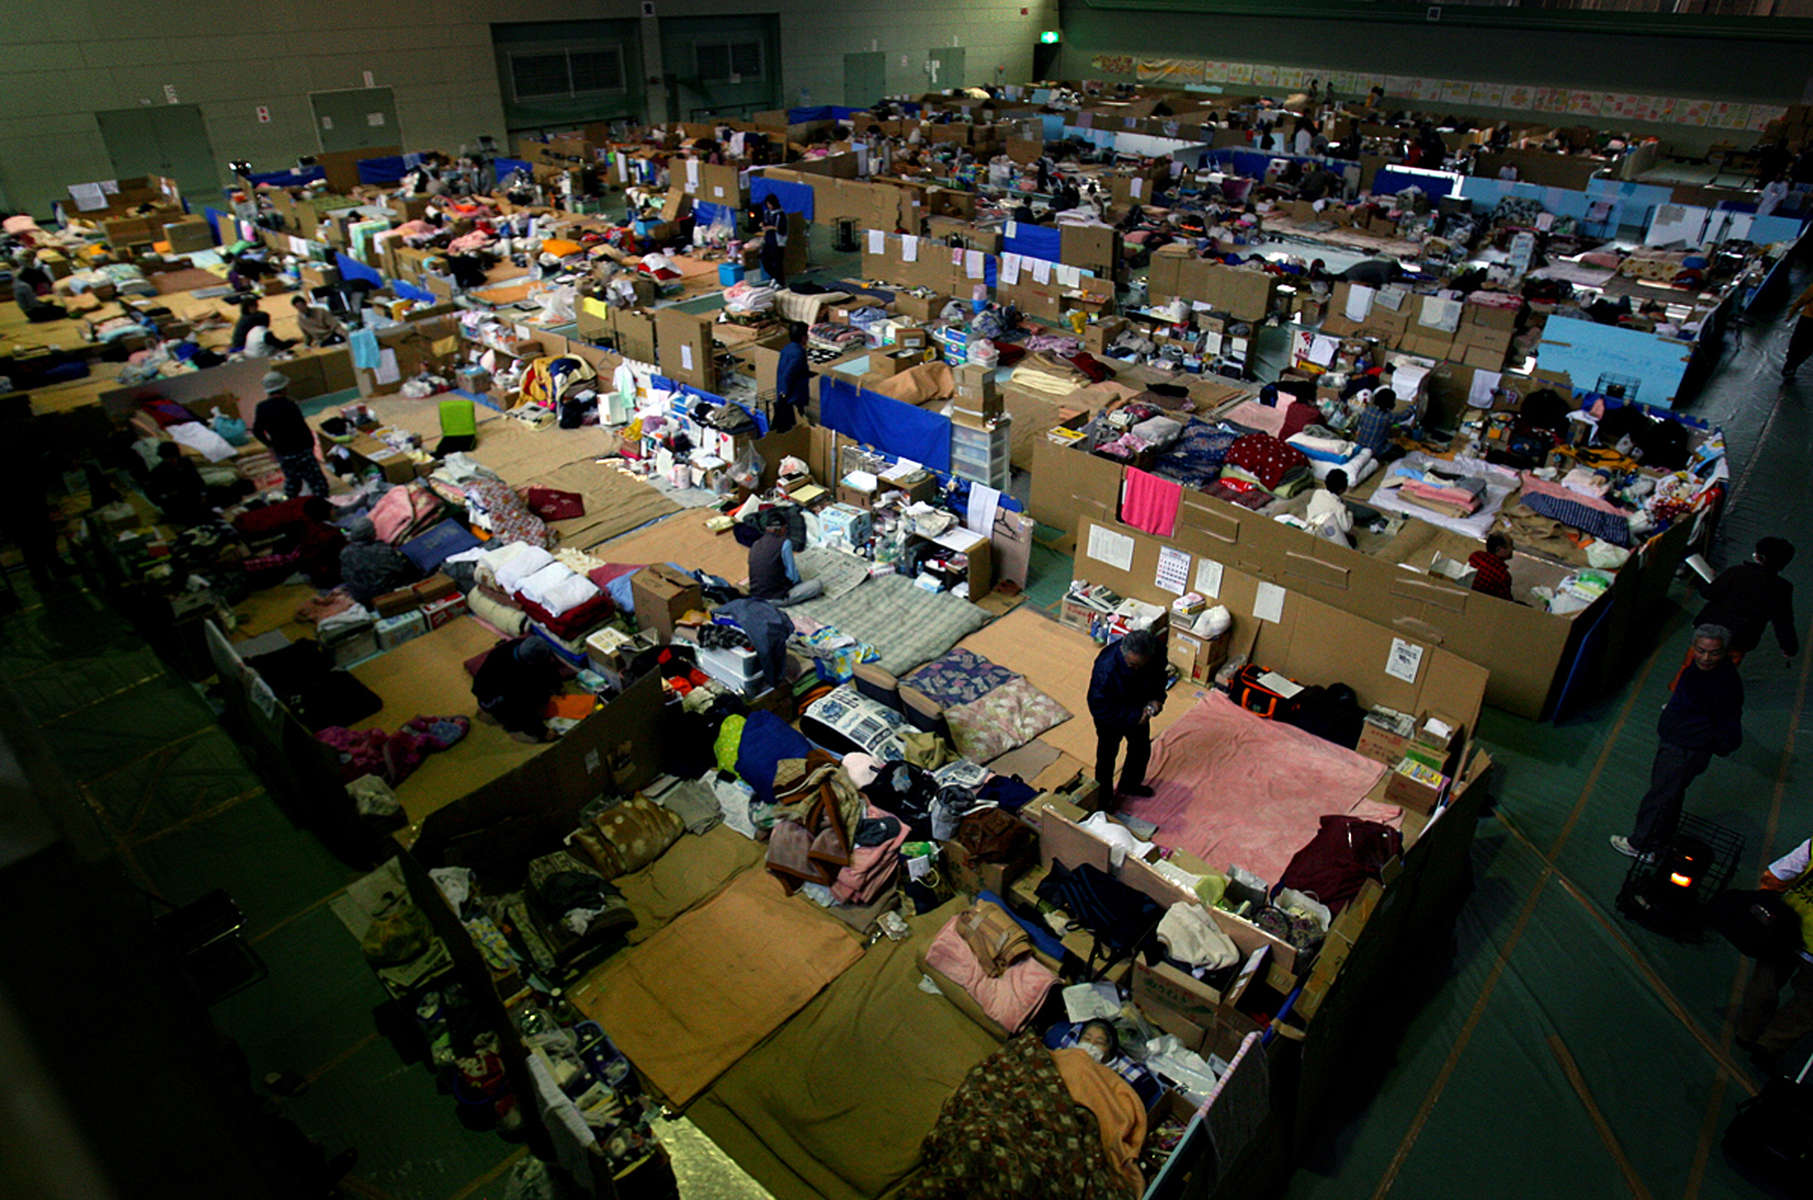 320 evacuees have been living in makeshift cardboard partitions at the gym since their homes were destroyed when a 9.0 earthquake and tsunami devastated Sendai, Japan. (The Press-Enterprise/ Mark Zaleski)